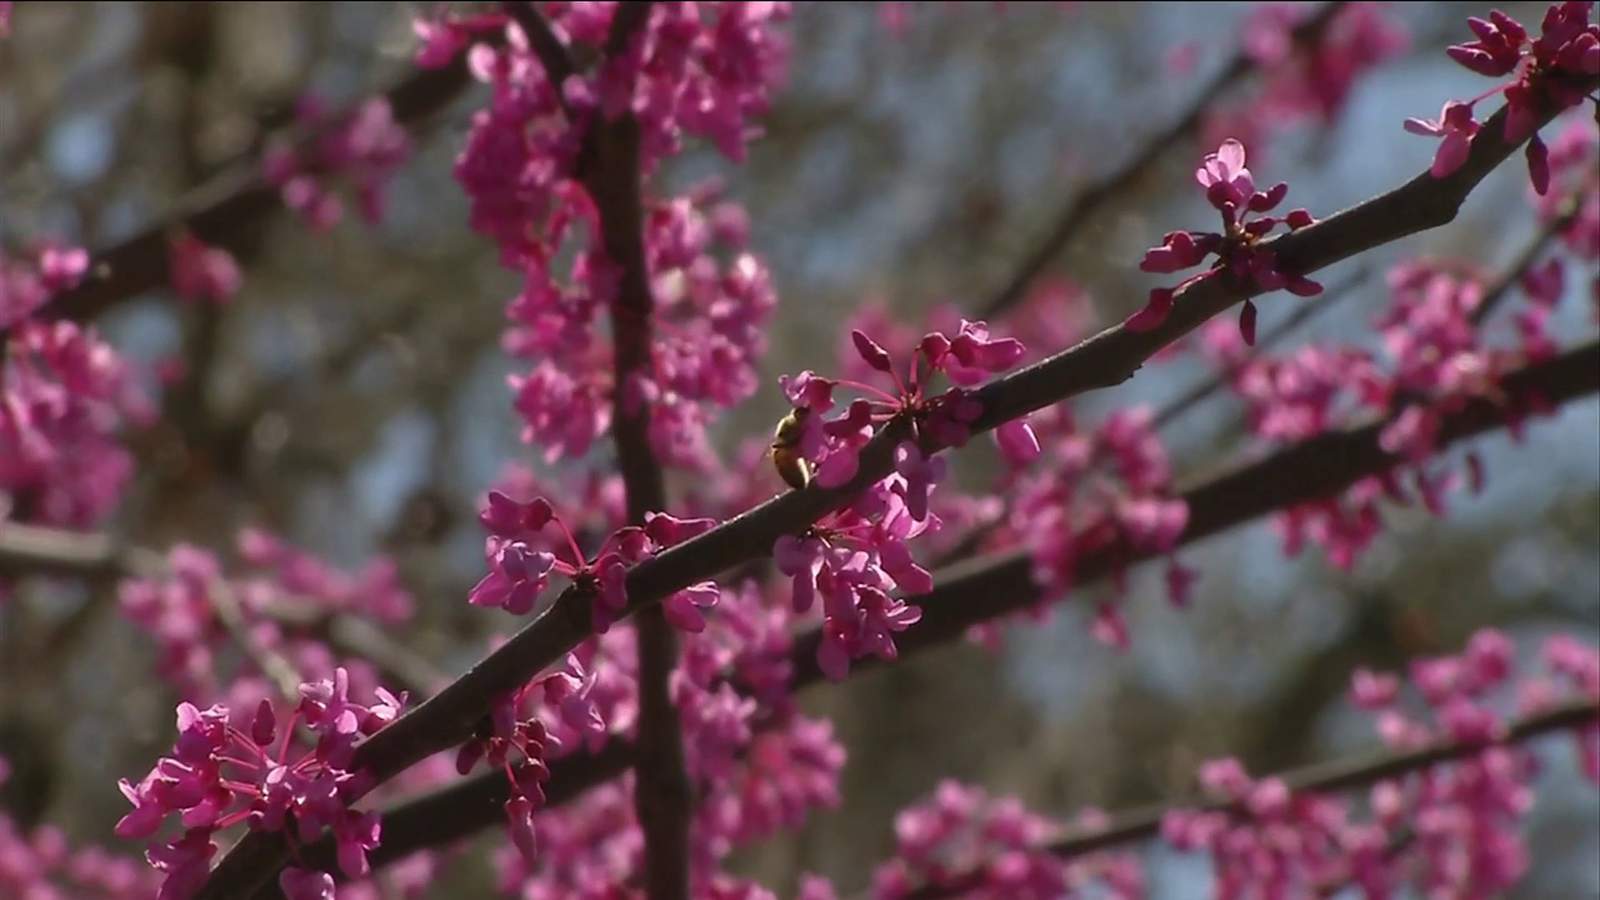 Allergies getting a head start following warmer than usual winter